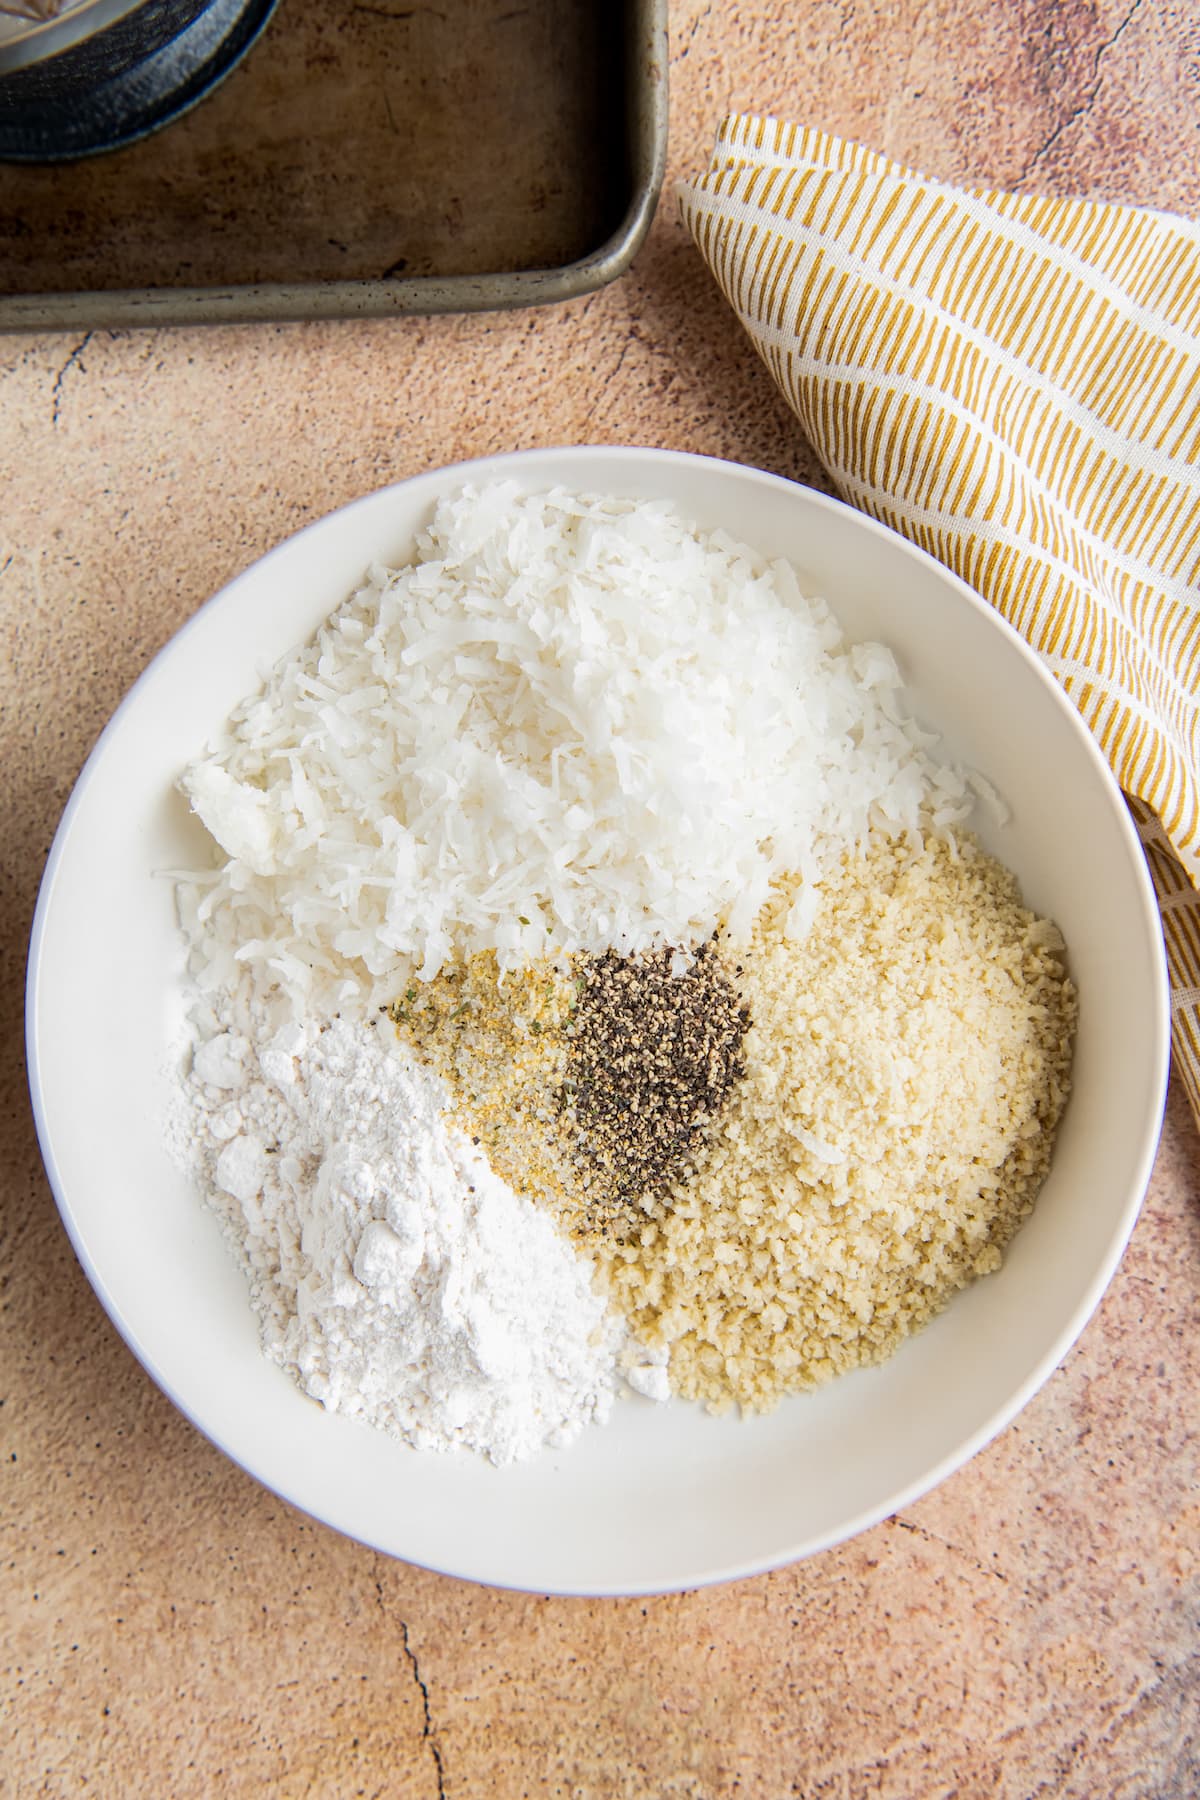 a bowl with dry ingredients like flour, coconut flakes, and seasonings